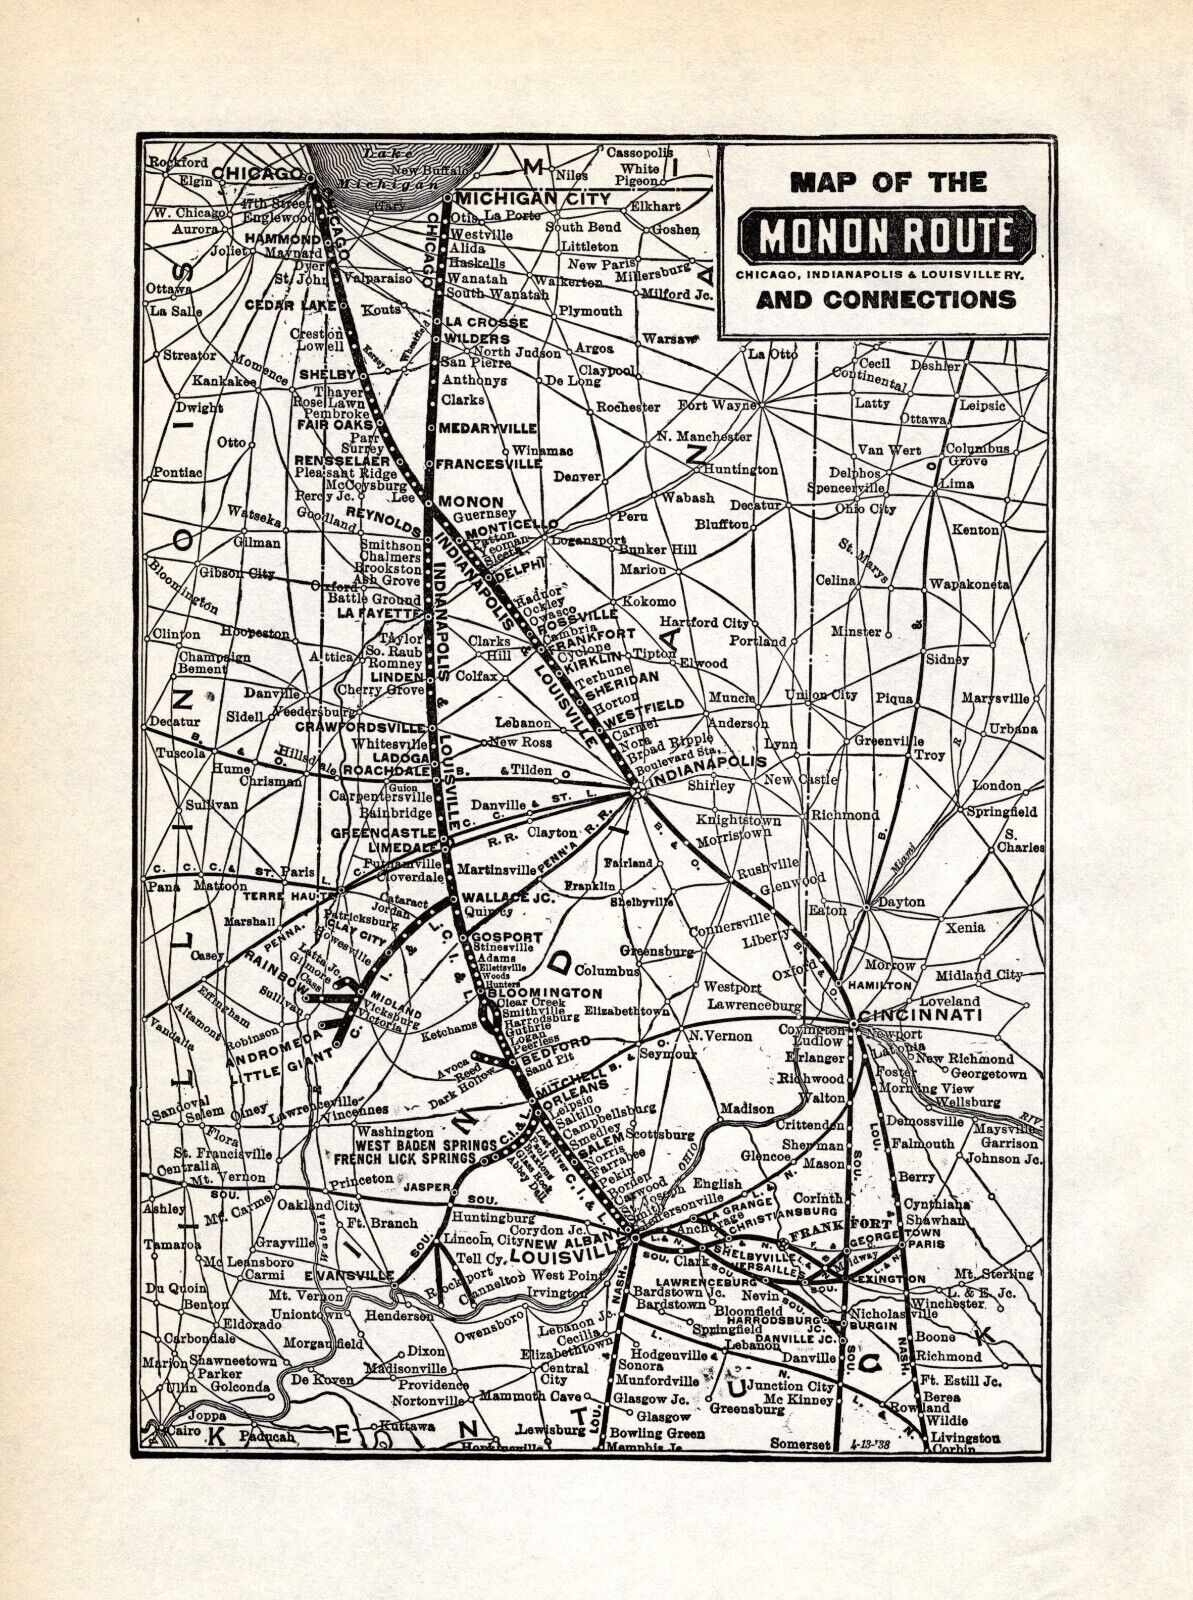 1938 Chicago Indianapolis and Louisville Railway Map Monon Route Map 1448